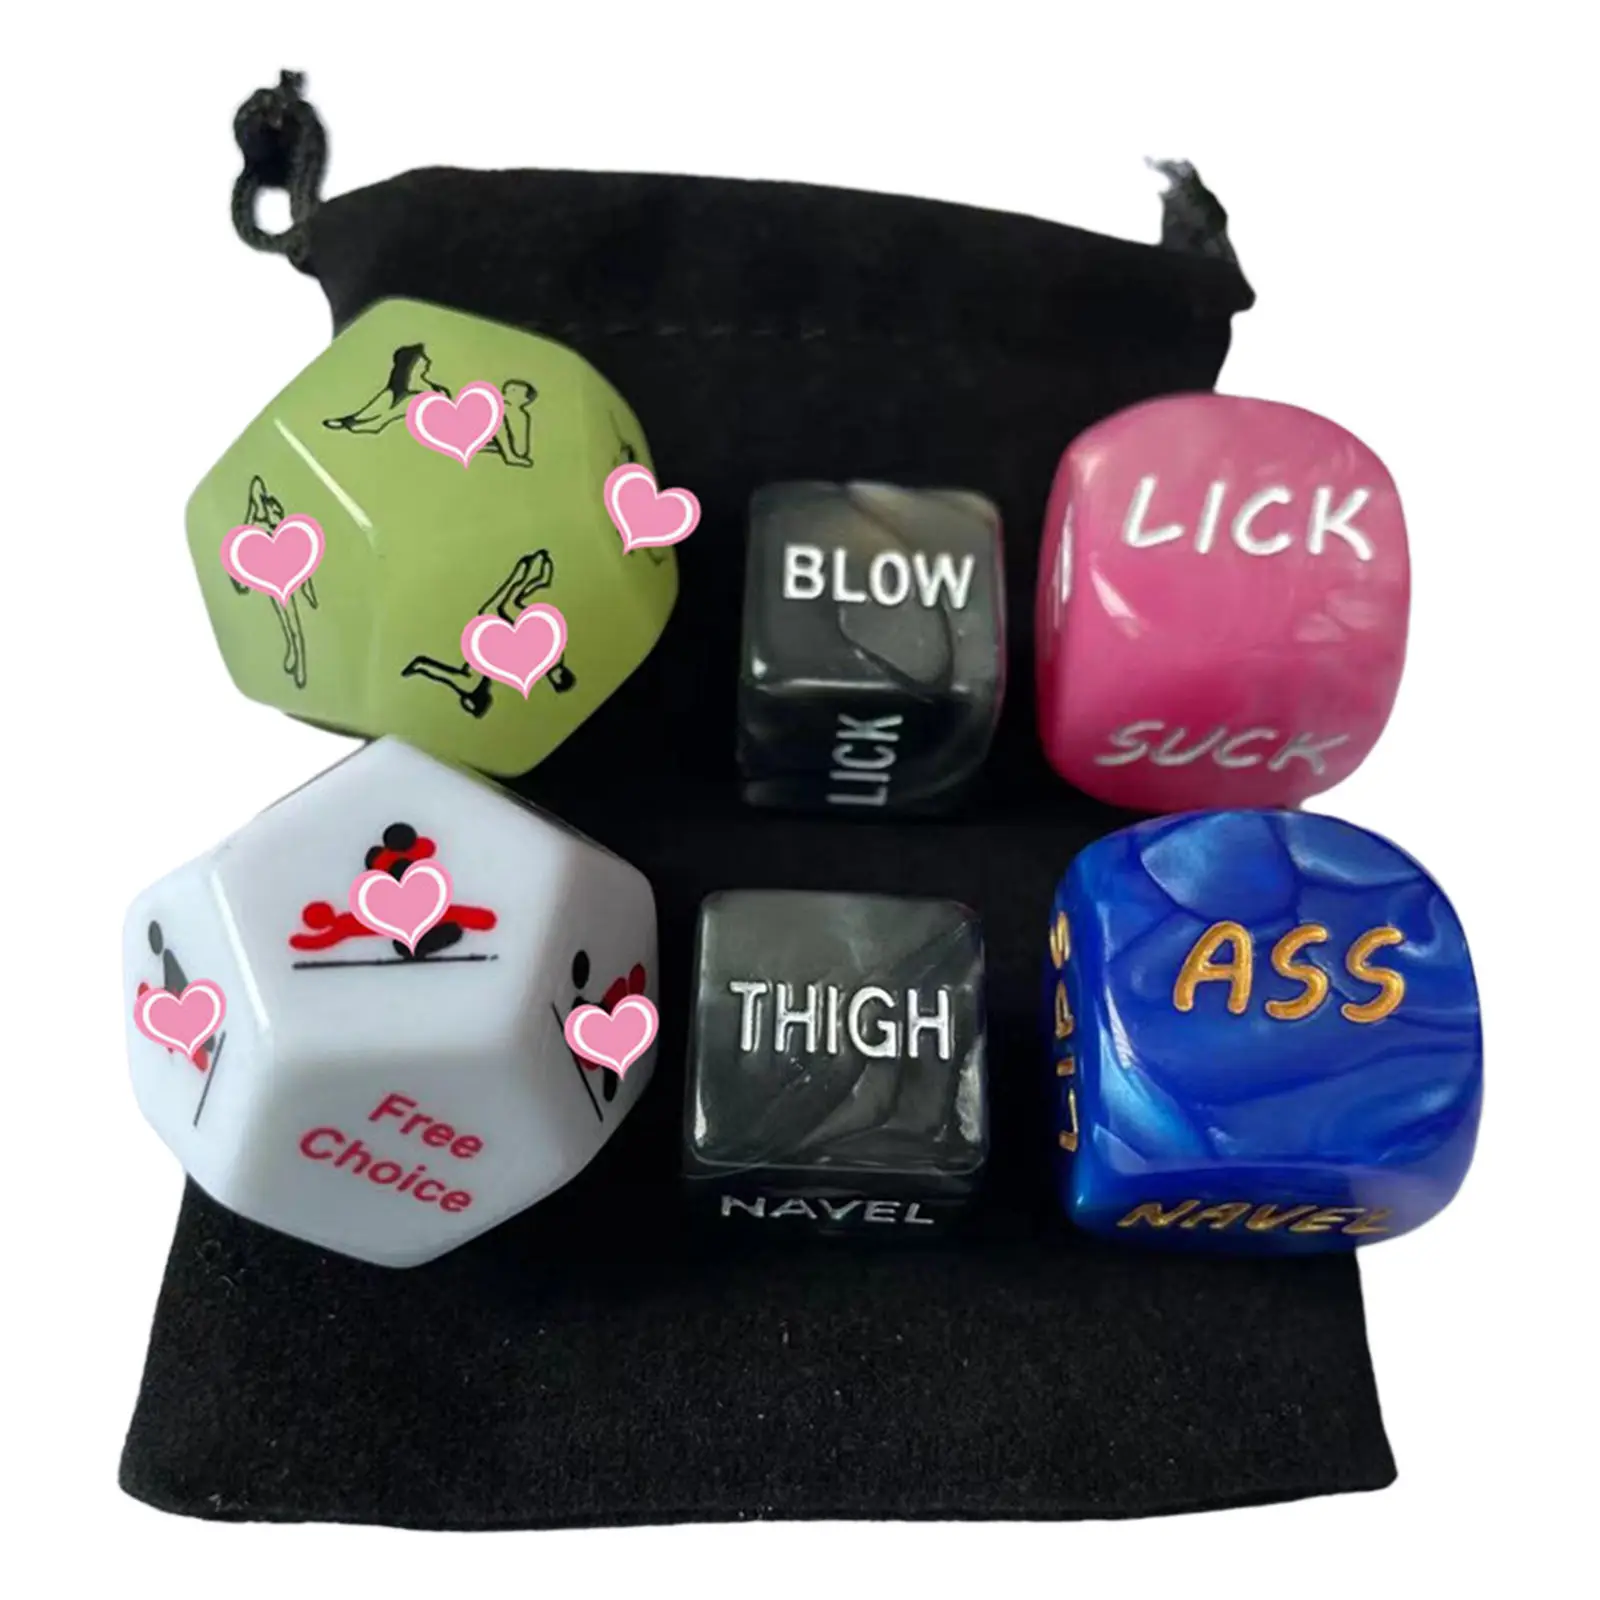 6pcs Funny Love Dice Fun Adult Love Posture Game Novelty Erotic Gift Honeymoon Funny Toy for Couple